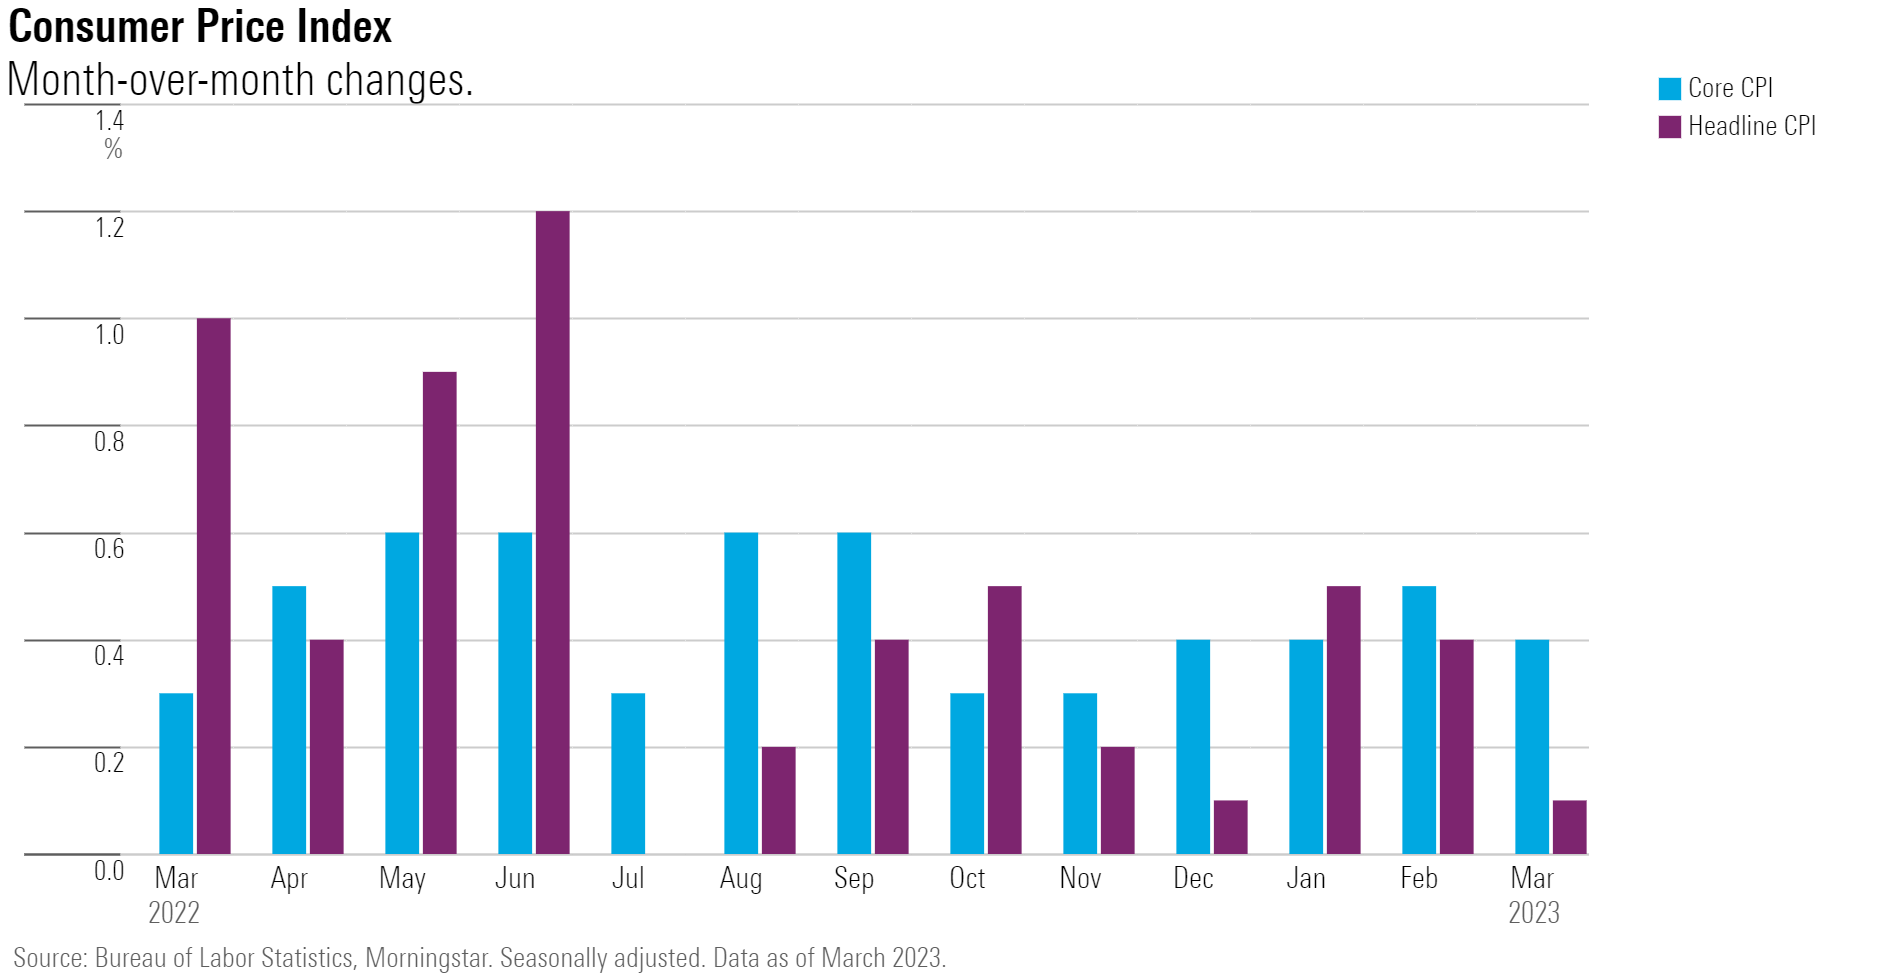 A bar chart showing the monthly changes in core CPi and headline CPI over the past year.